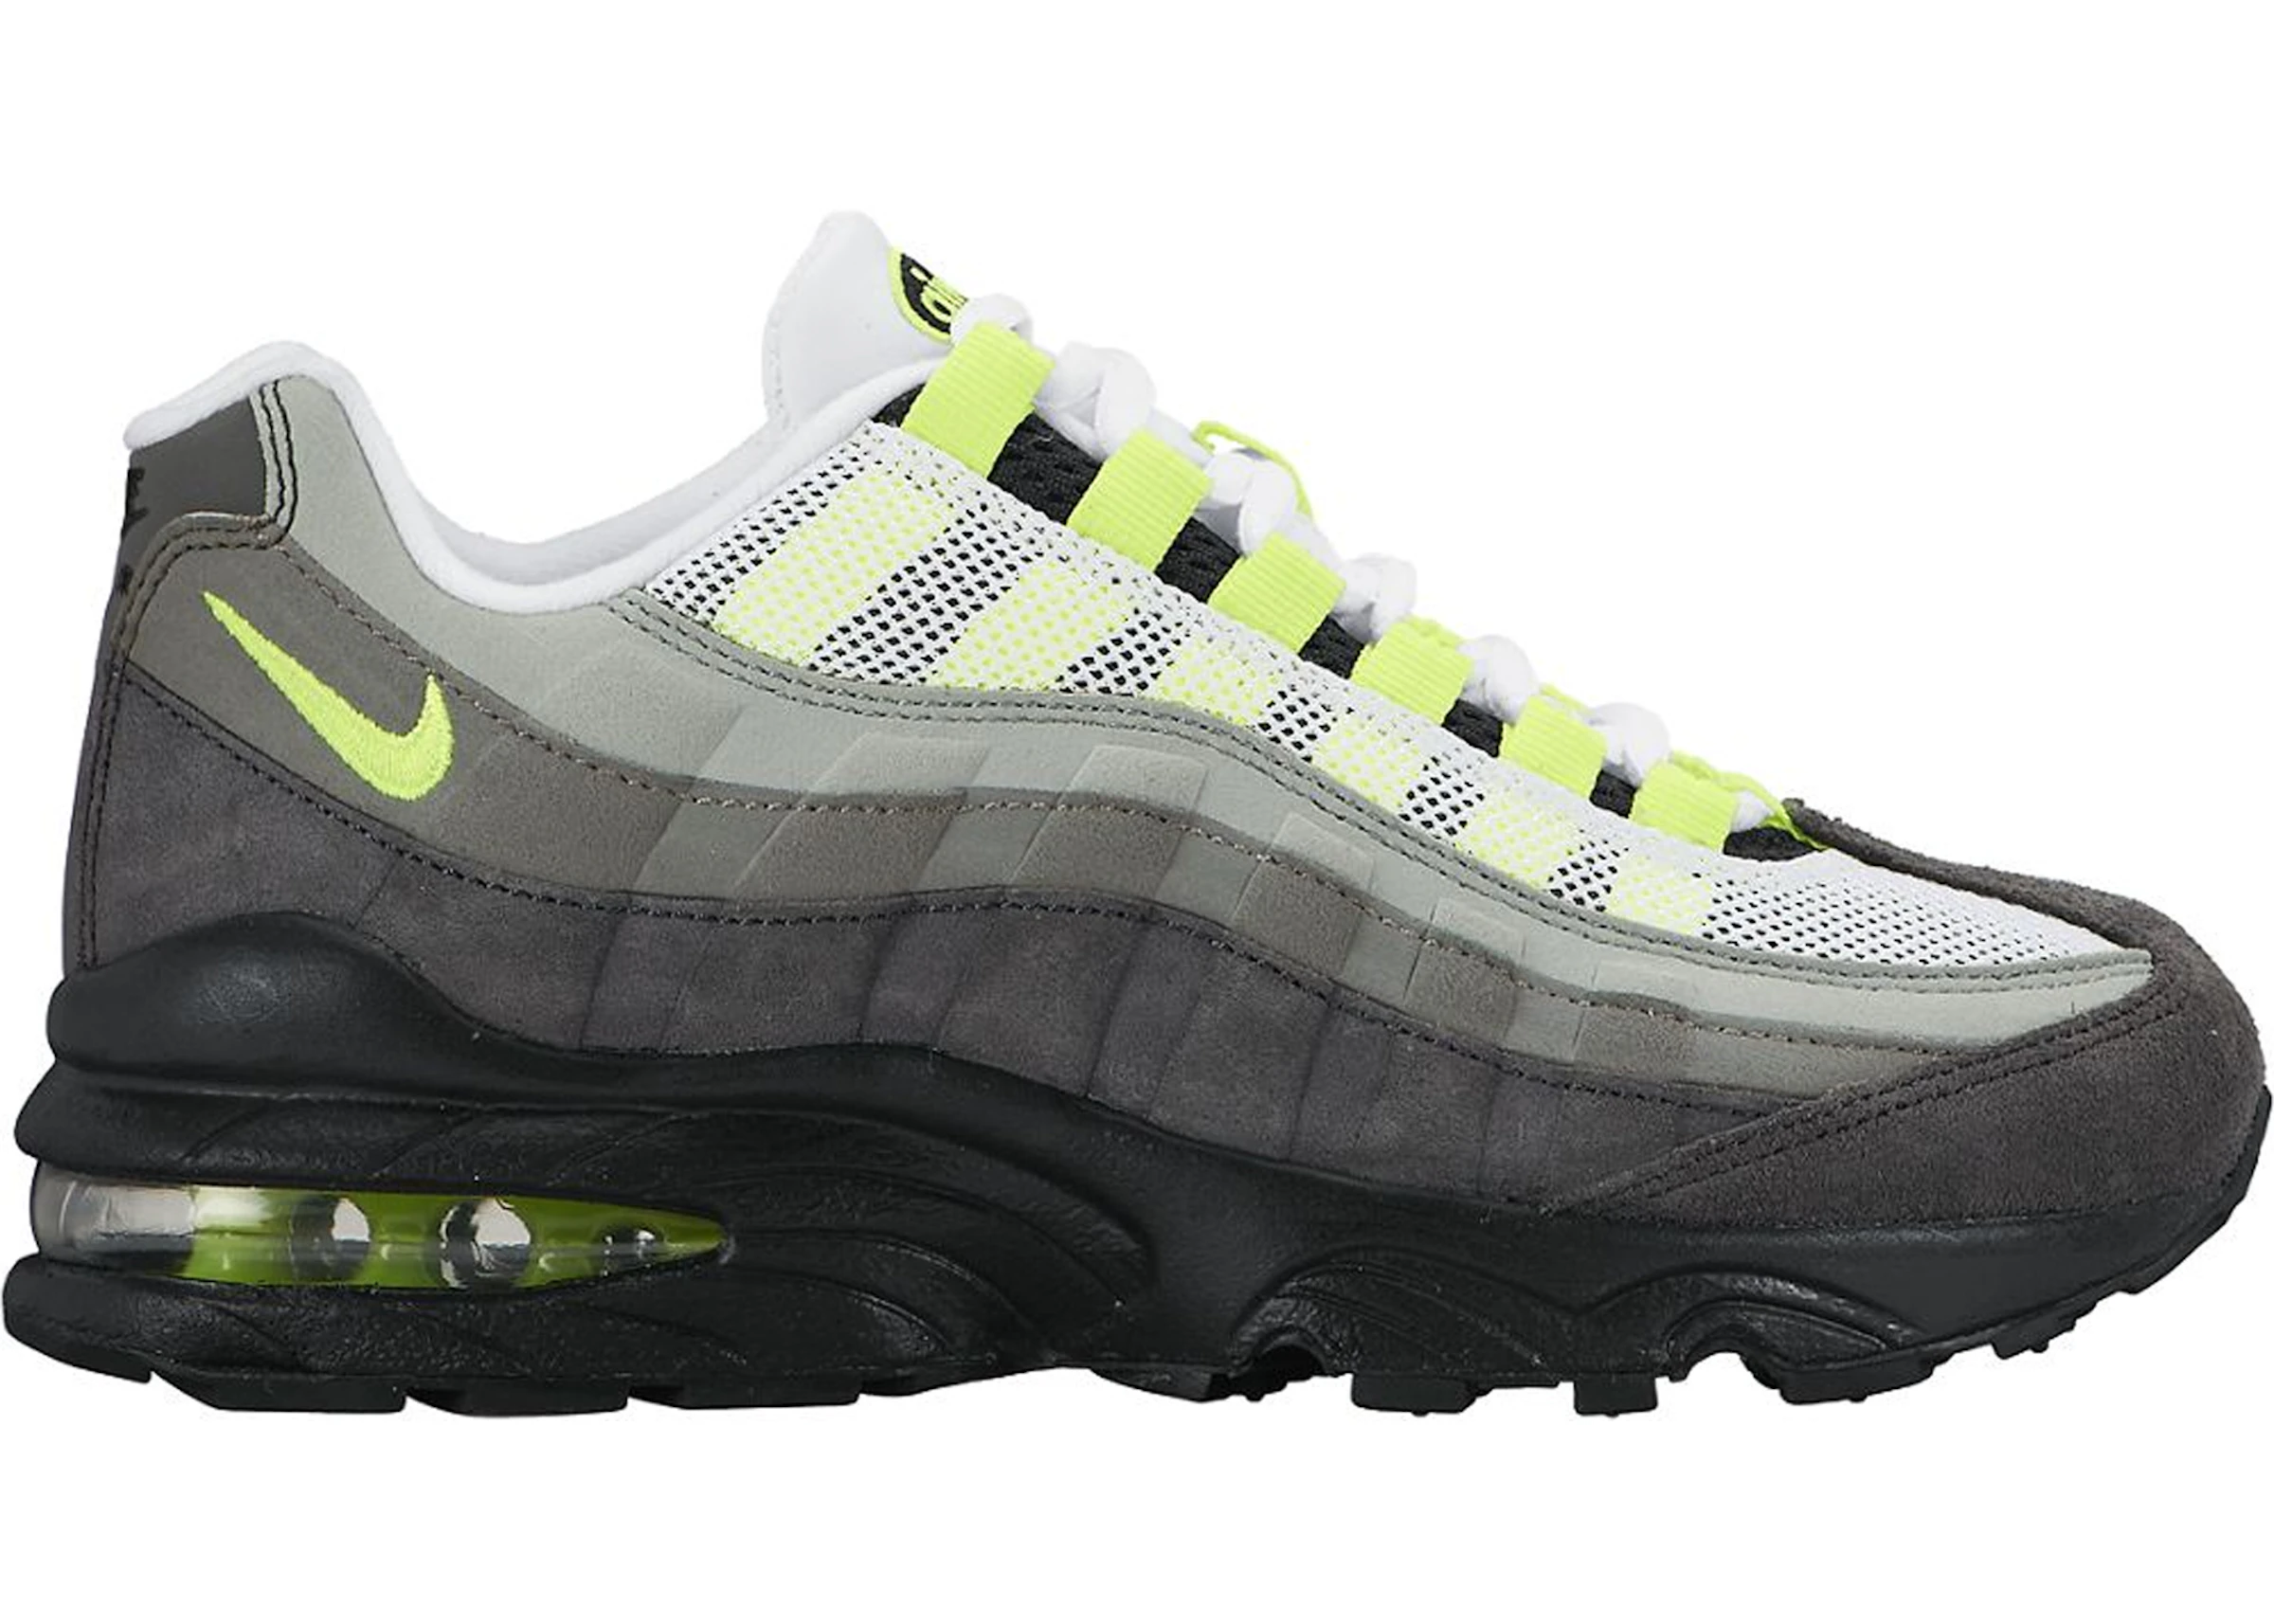 silhouette disinfect paint Nike Air Max 95 Neon (2015) (GS) - 307565-077 - US